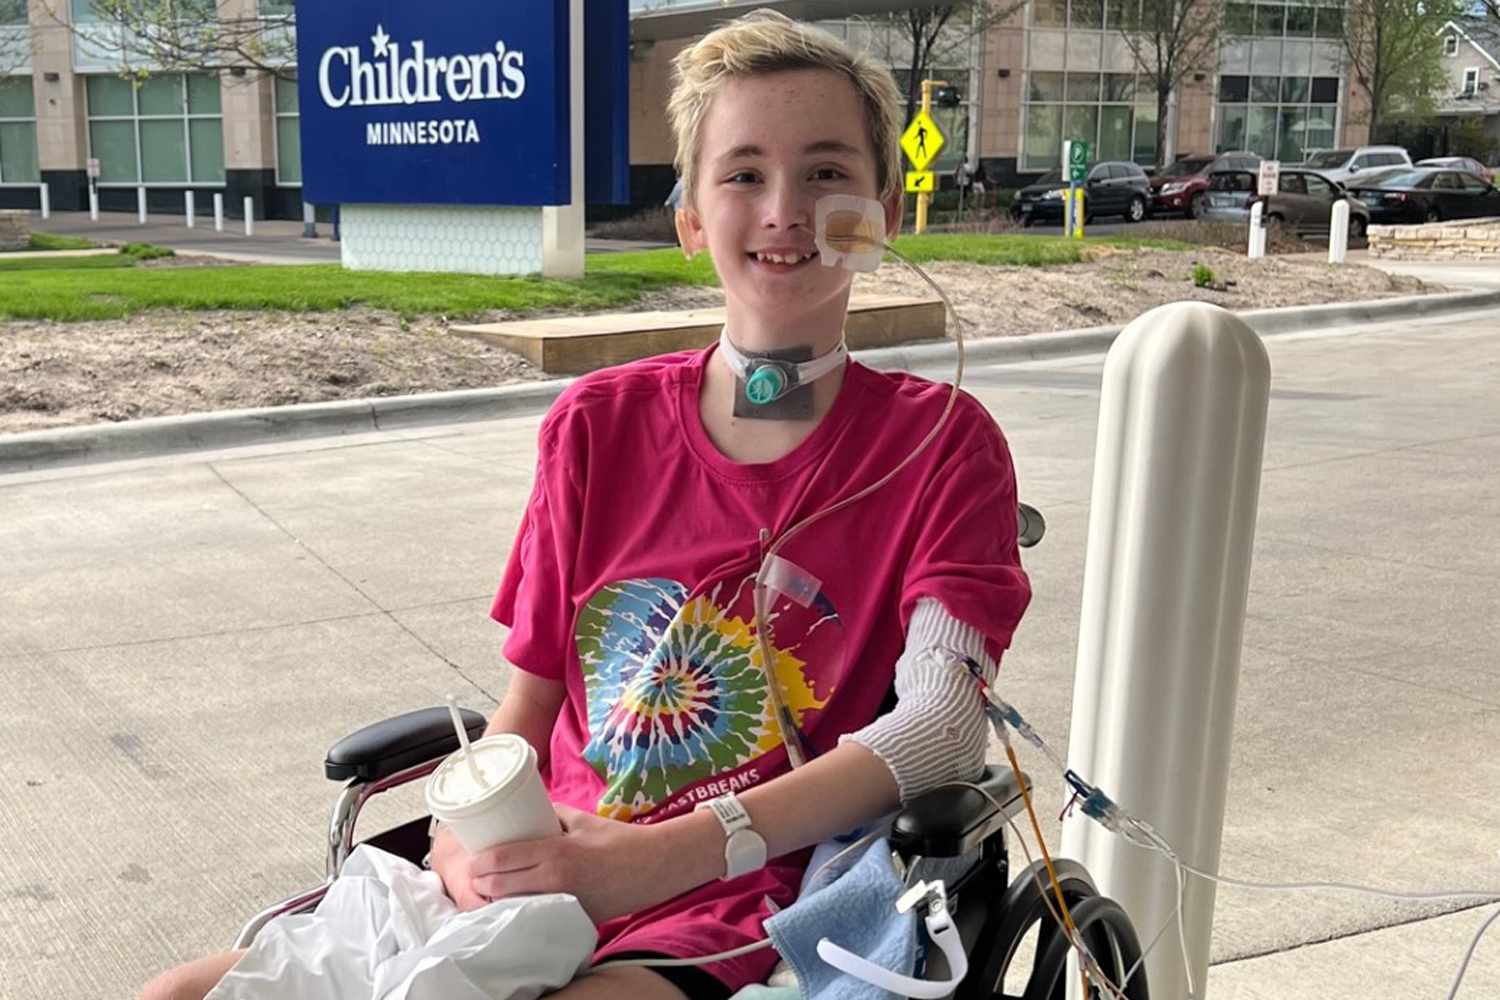 Teen Becomes Temporarily Paralyzed After 2 Insect Bites: 'Something Was Very Wrong'